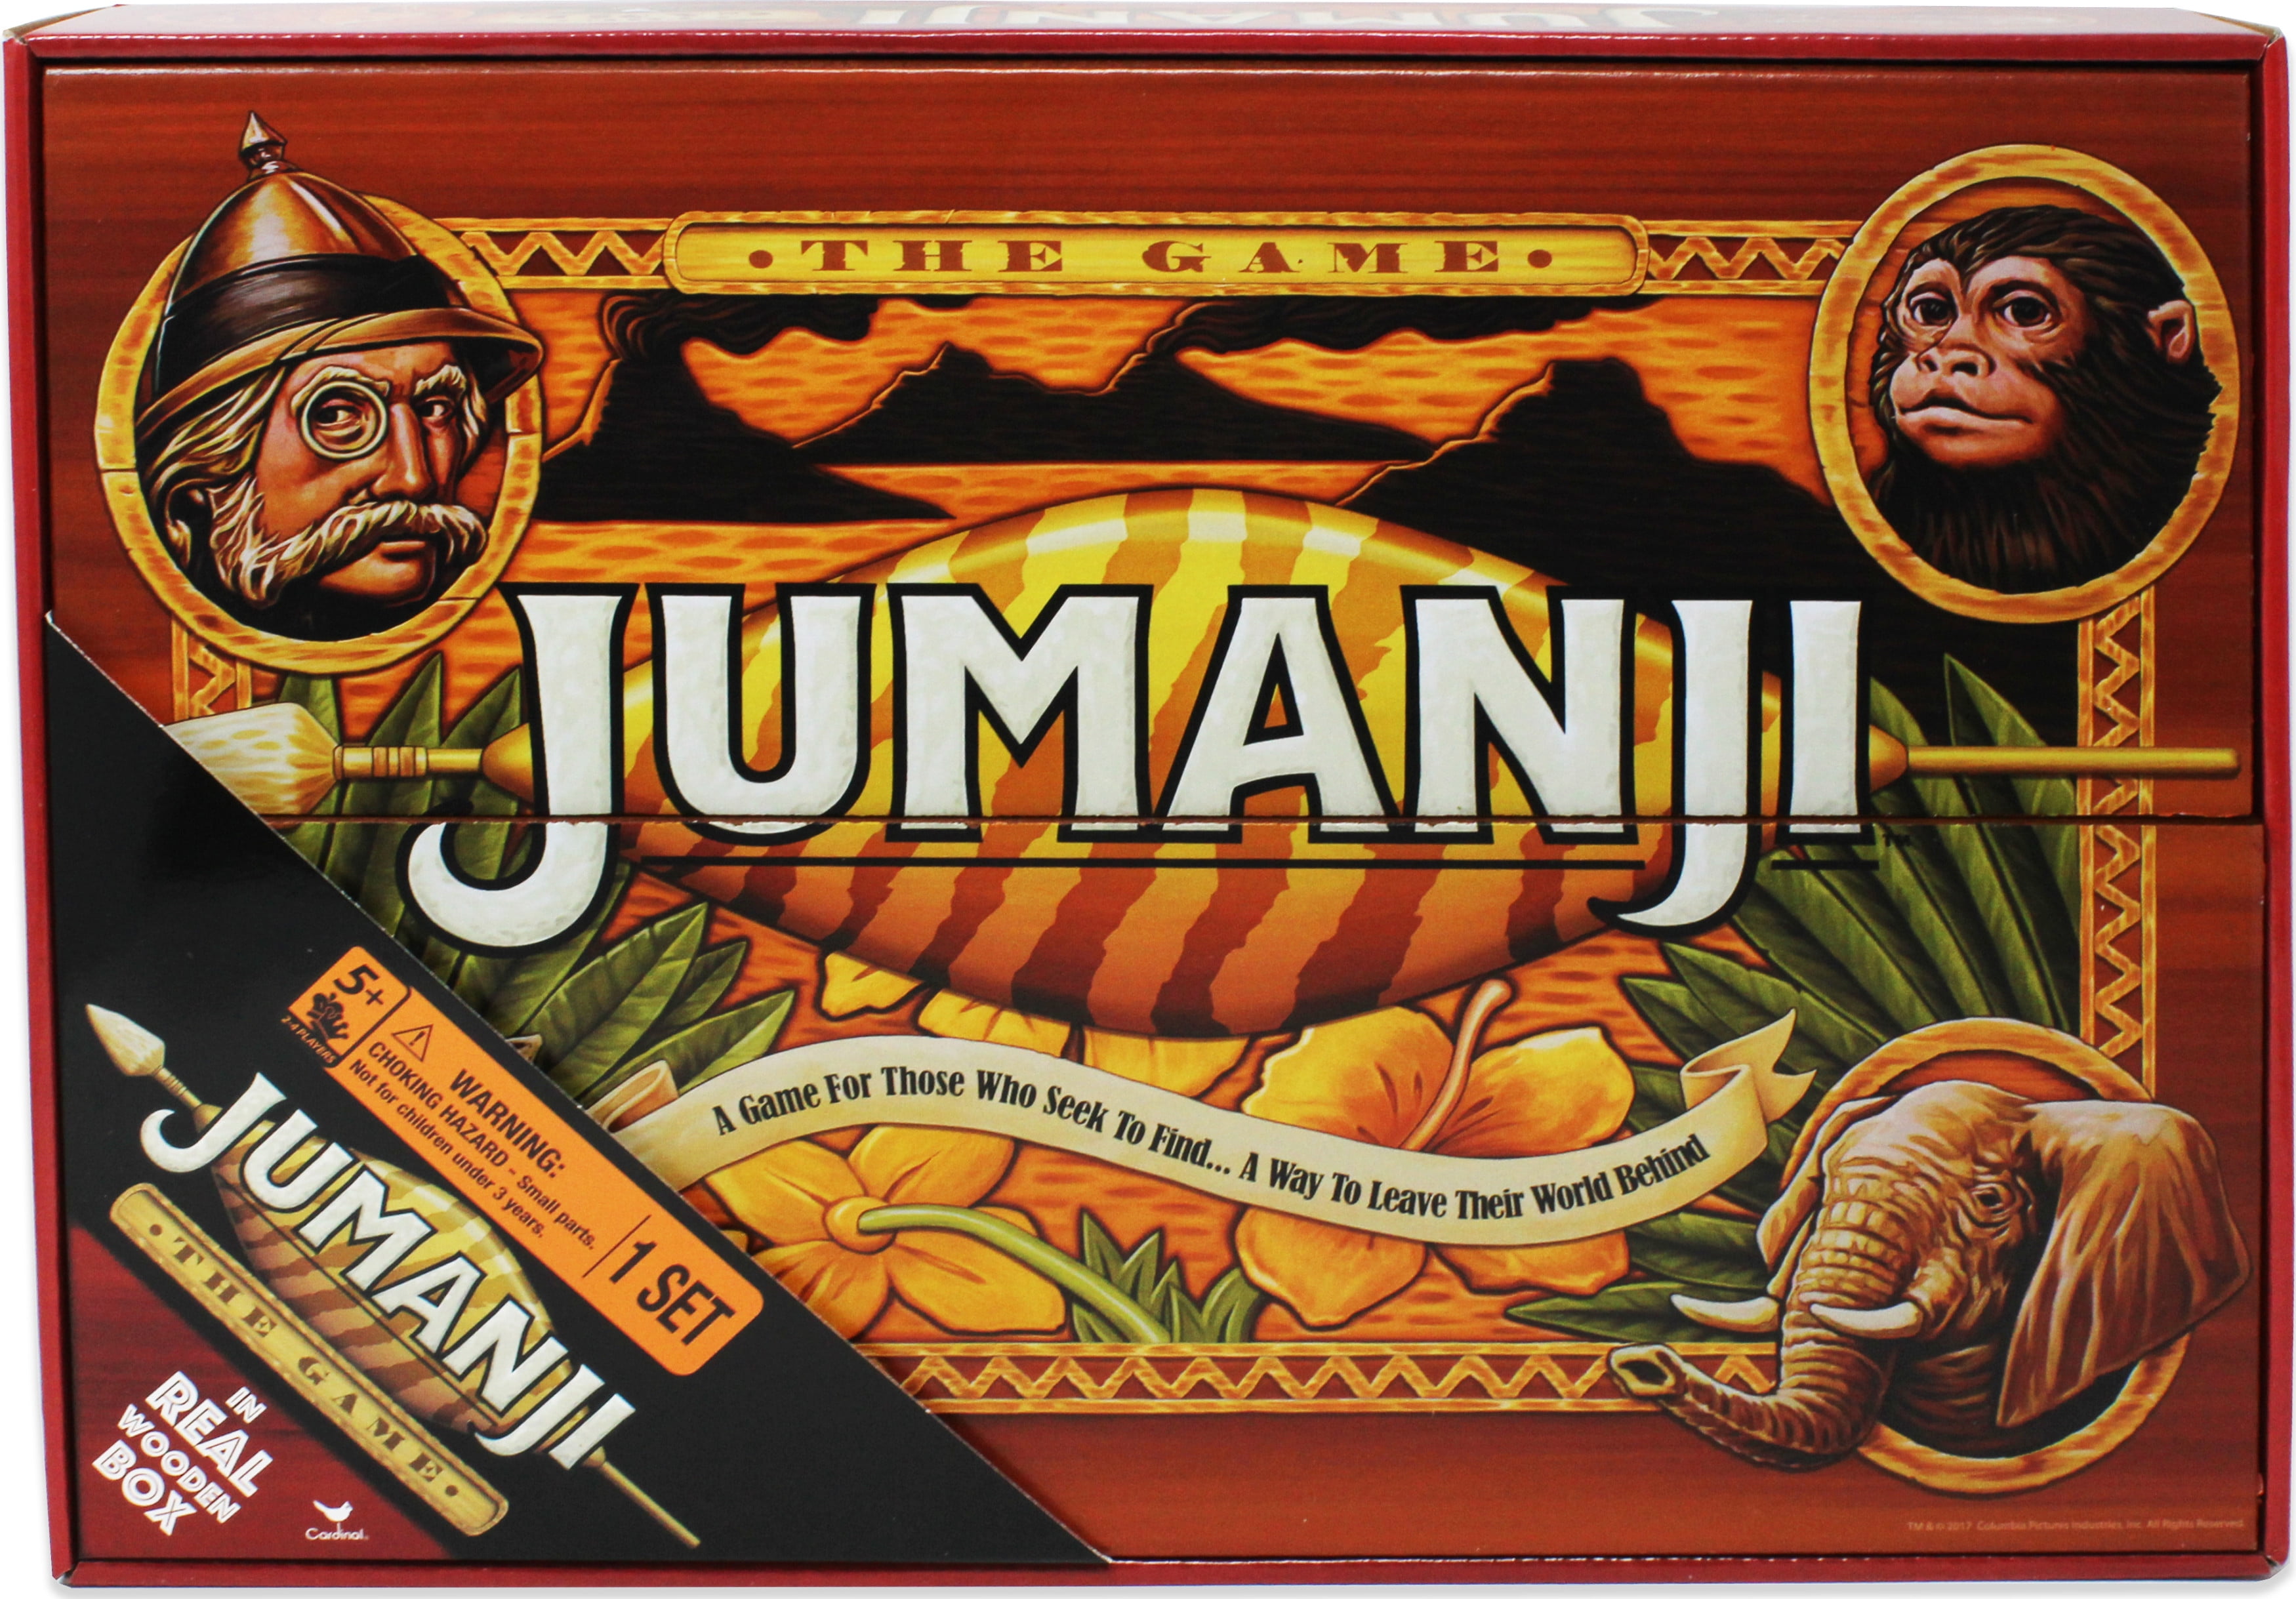 Jumanji The Game In Real Wooden Box Toys & Hobbies Games La2669212